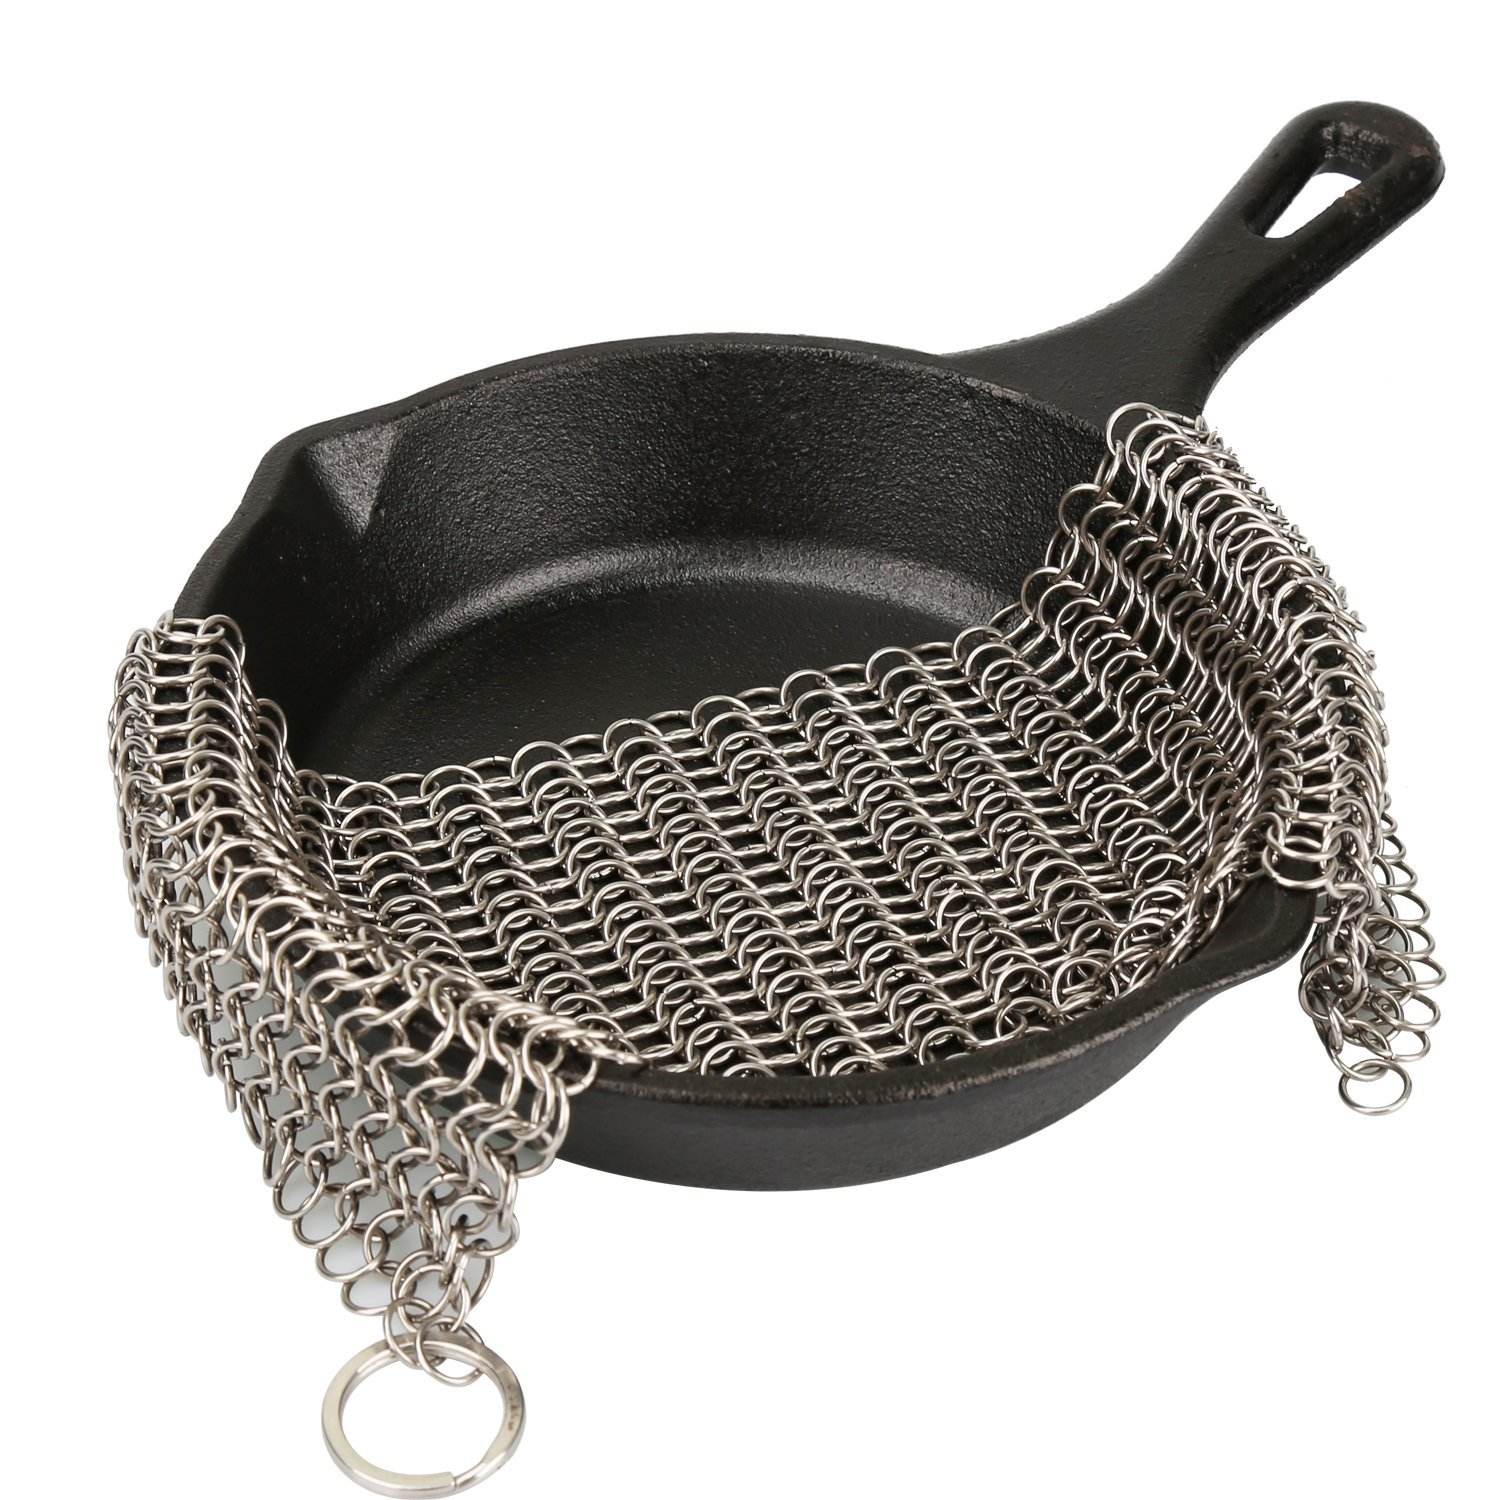 Today only: LauKingdom stainless steel cast iron cleaner for $10